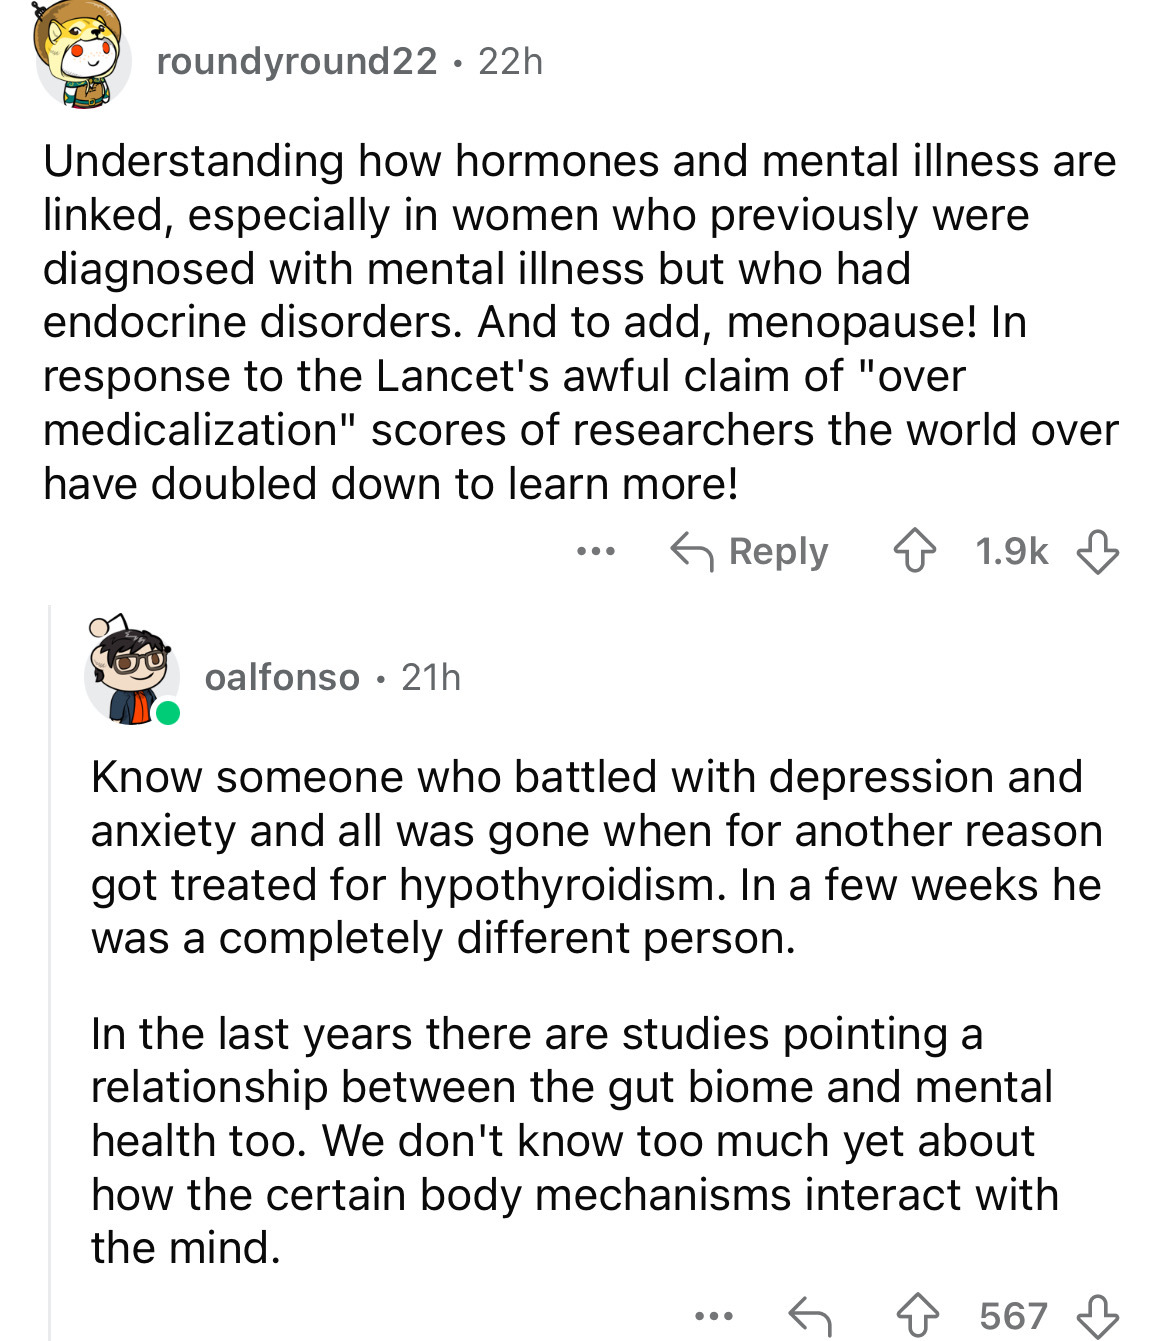 document - roundyround22 22h Understanding how hormones and mental illness are linked, especially in women who previously were diagnosed with mental illness but who had endocrine disorders. And to add, menopause! In response to the Lancet's awful claim of